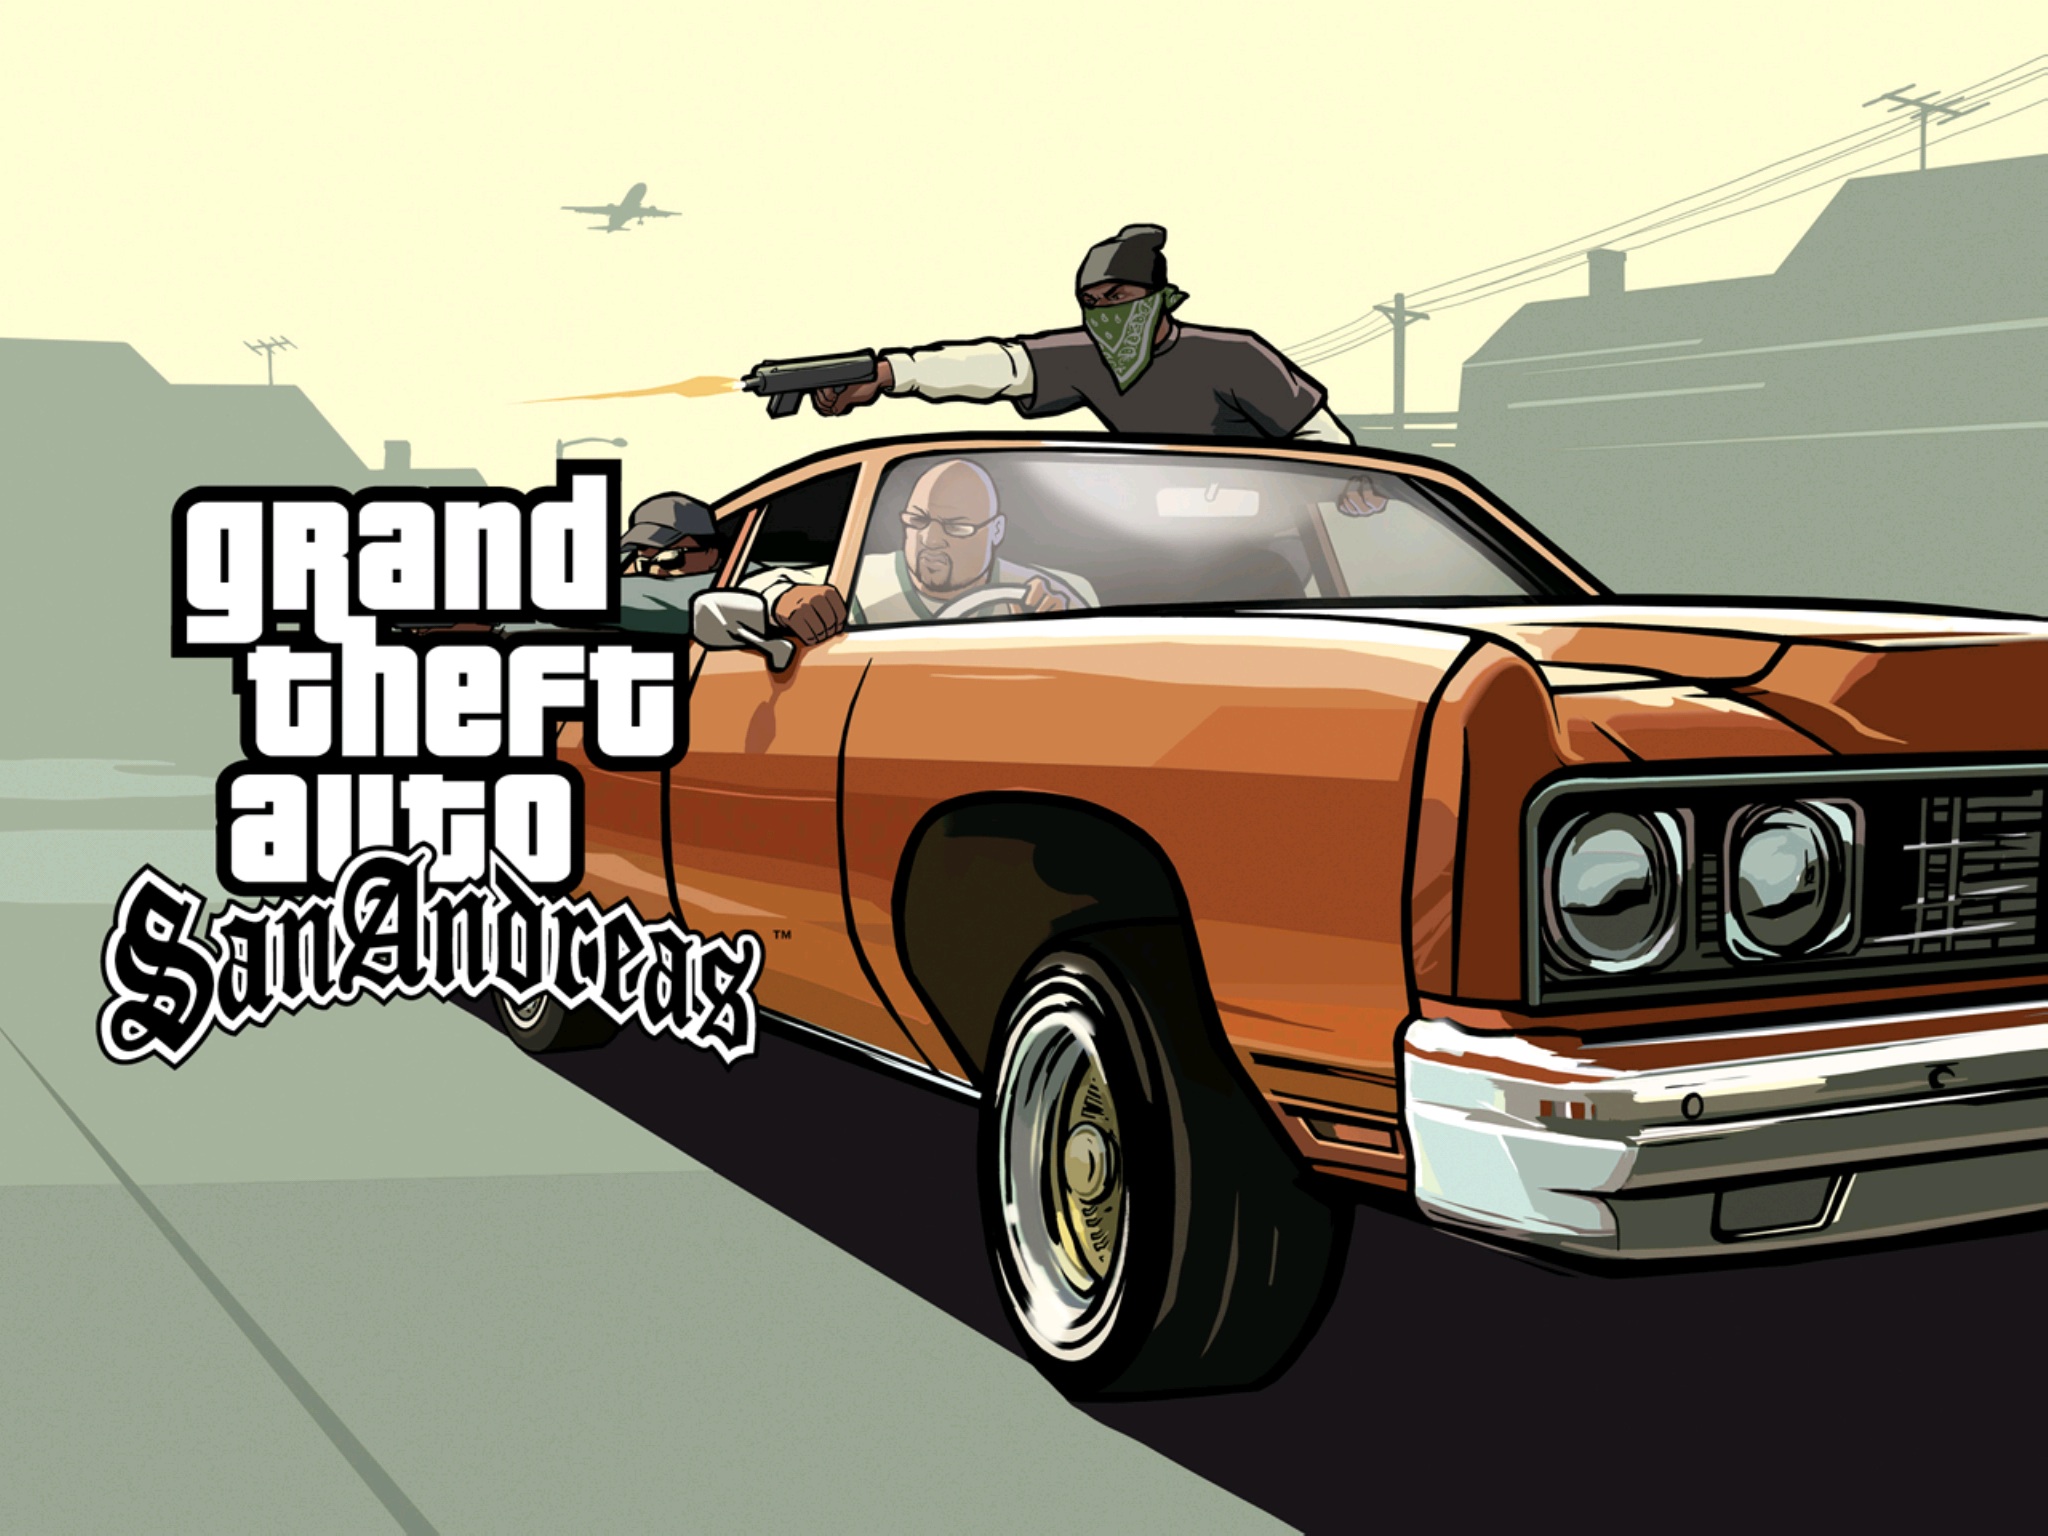 'Grand Theft Auto San Andreas' Review  Throw Some Chedda' at This